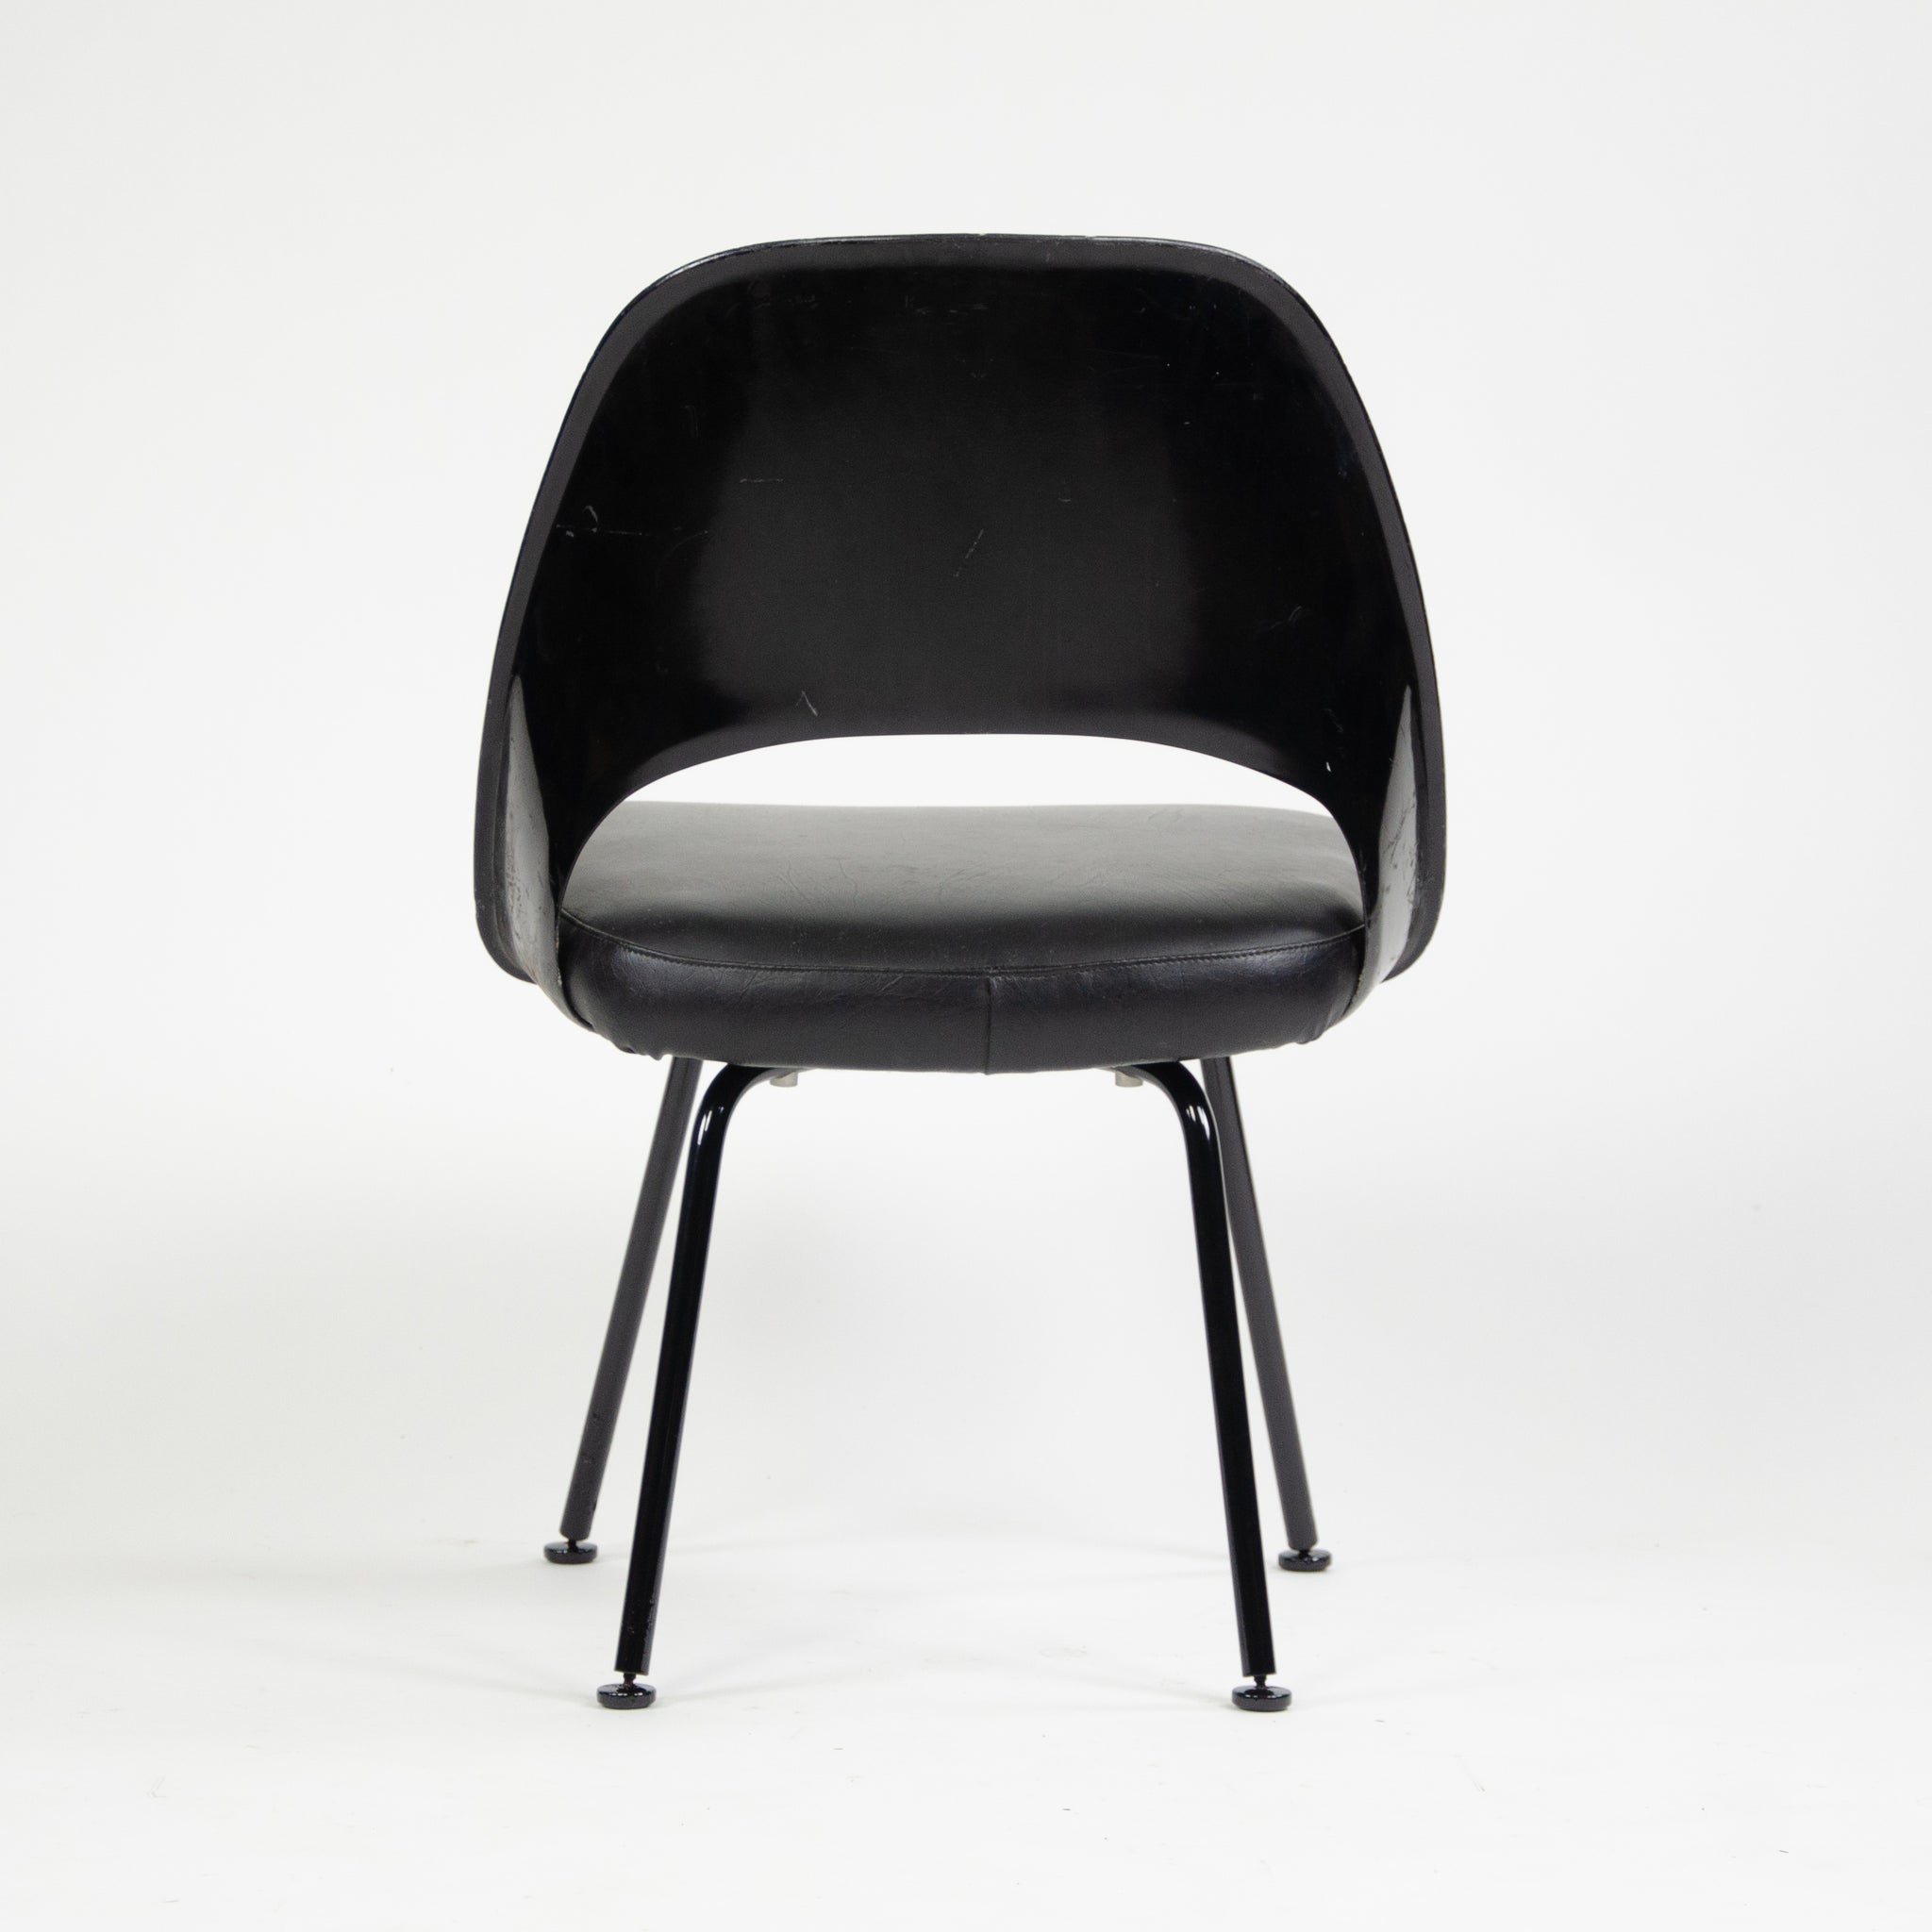 SOLD 1968 Knoll Eero Saarinen Armless Executive Chairs Sets Avail MINT Eames 16 Available